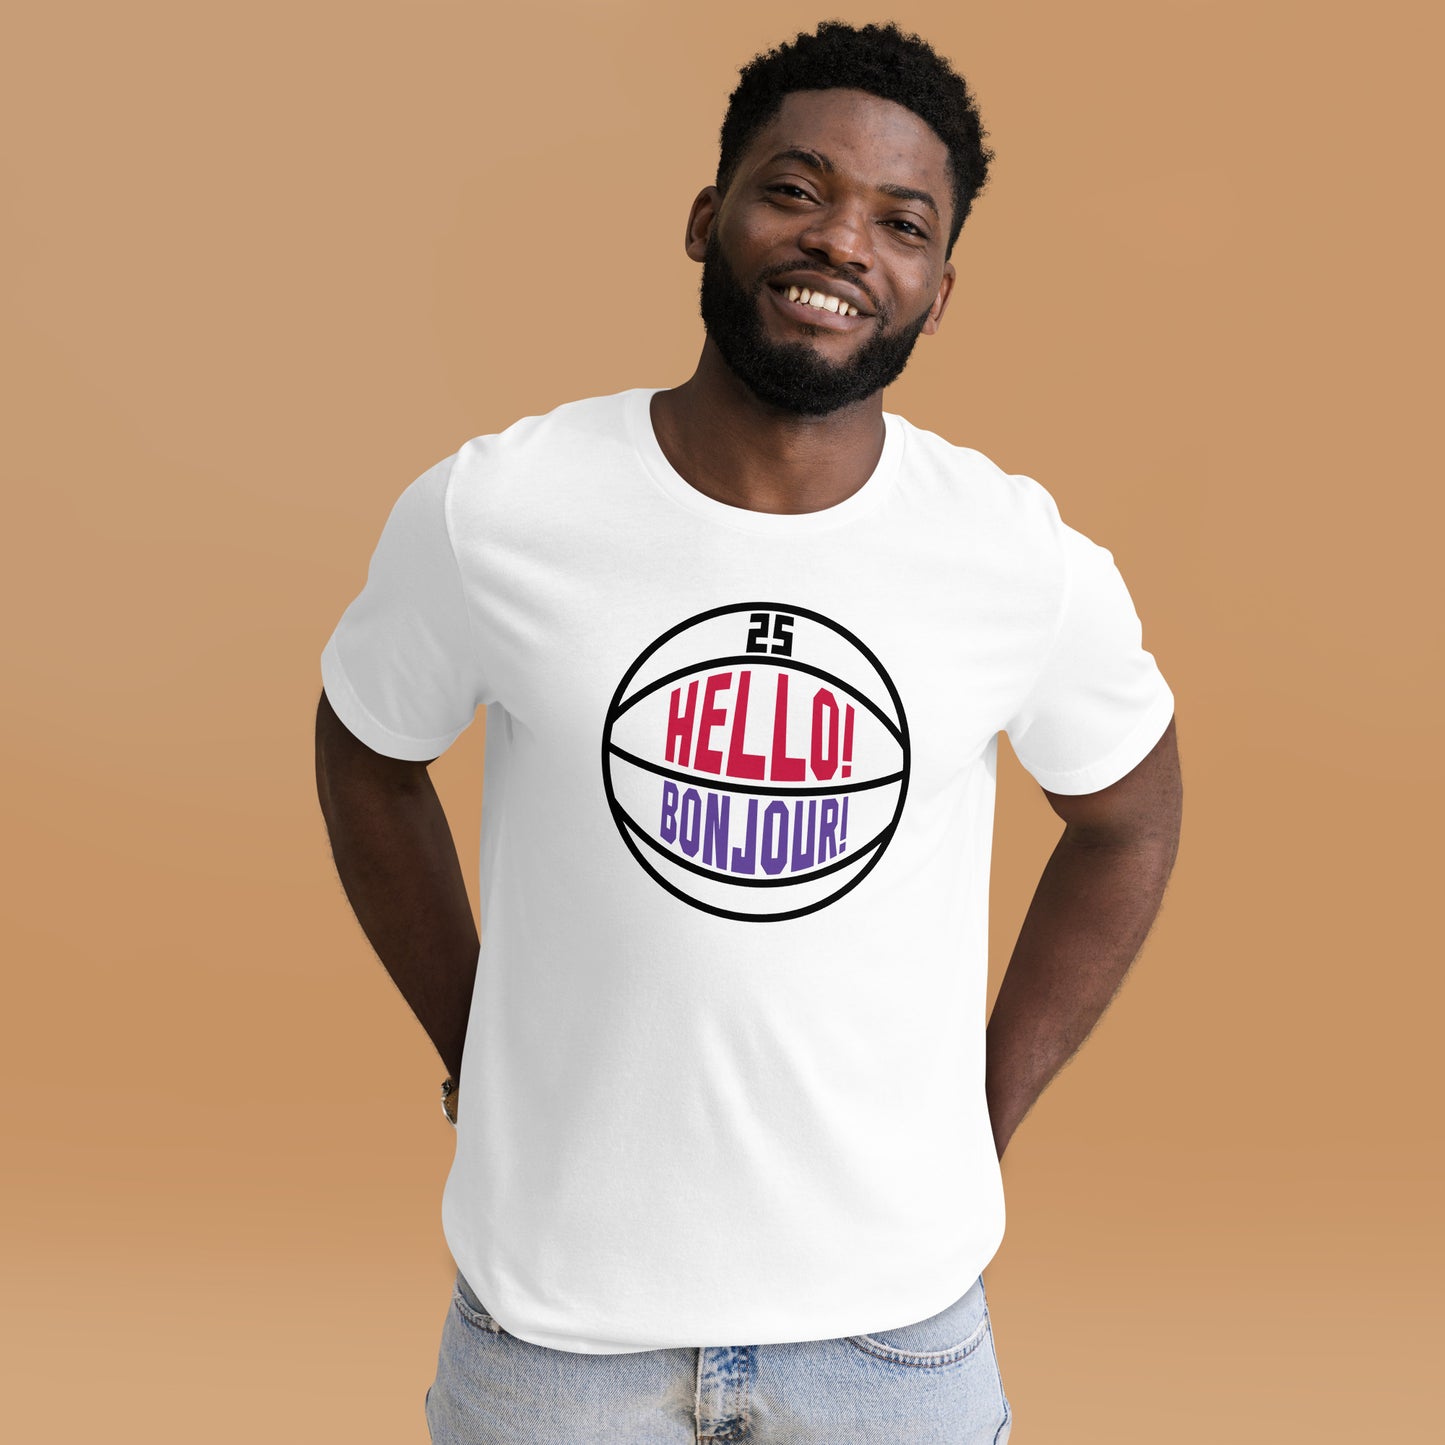 T-shirt worn by man, this image details the graphic design "Hello! Bonjour!". In the image, the words are built into a basketball and feature Chris Boucher's number 25. The Toronto Raptors' announcer, Jack Armstrong, loves to shout out Hello! Bonjour! when Chris Boucher does something exciting on the court. The tee is white and the design is black/red/purple similar to the Toronto Raptors retro colours. This item is exclusive to tailgate mercantile and is available only online.